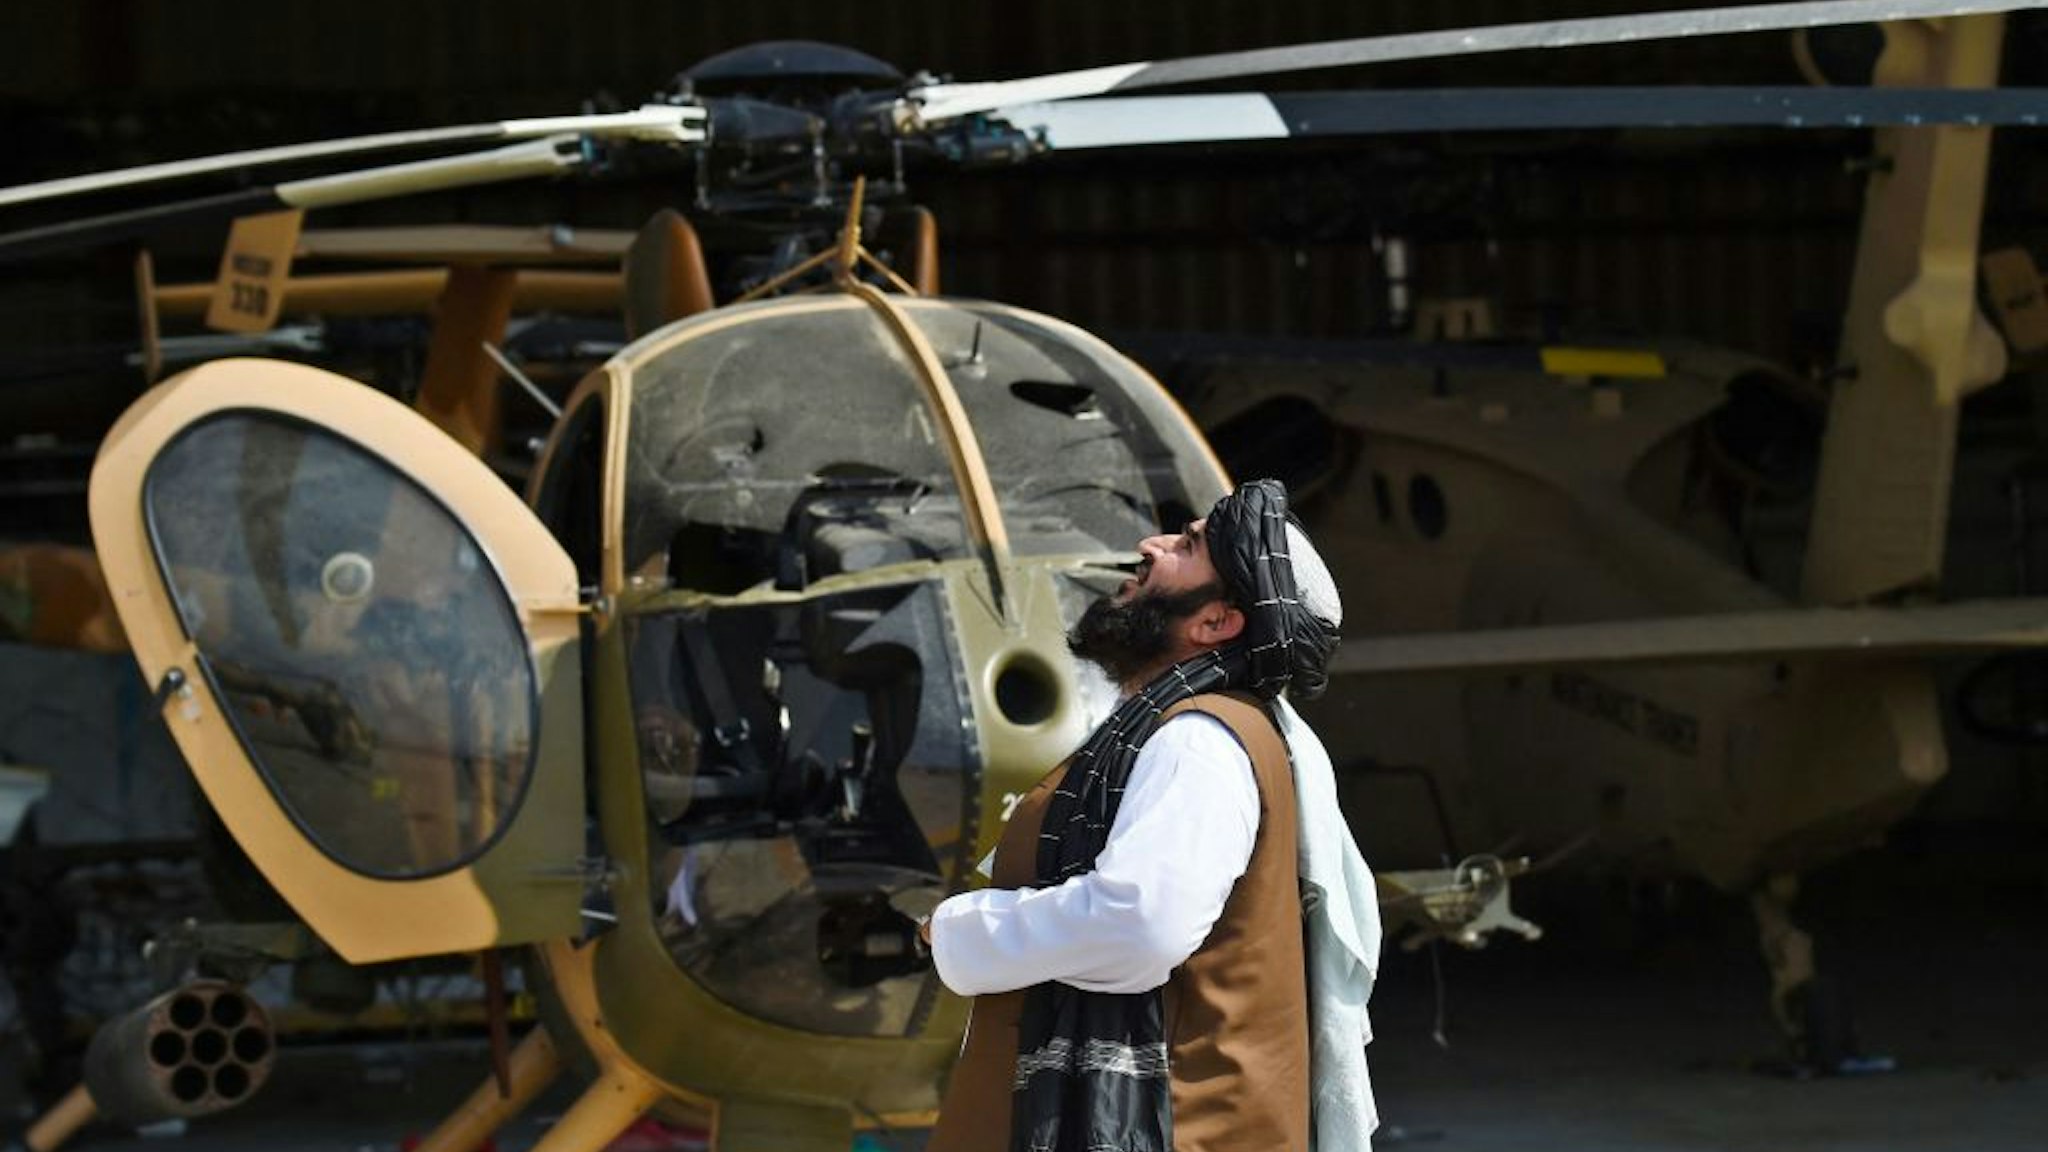 Taliban member looks up standing next to a damaged helicopter at the airport in Kabul on August 31, 2021, after the US has pulled all its troops out of the country to end a brutal 20-year war -- one that started and ended with the hardline Islamist in power. (Photo by Wakil KOHSAR / AFP) (Photo by WAKIL KOHSAR/AFP via Getty Images)